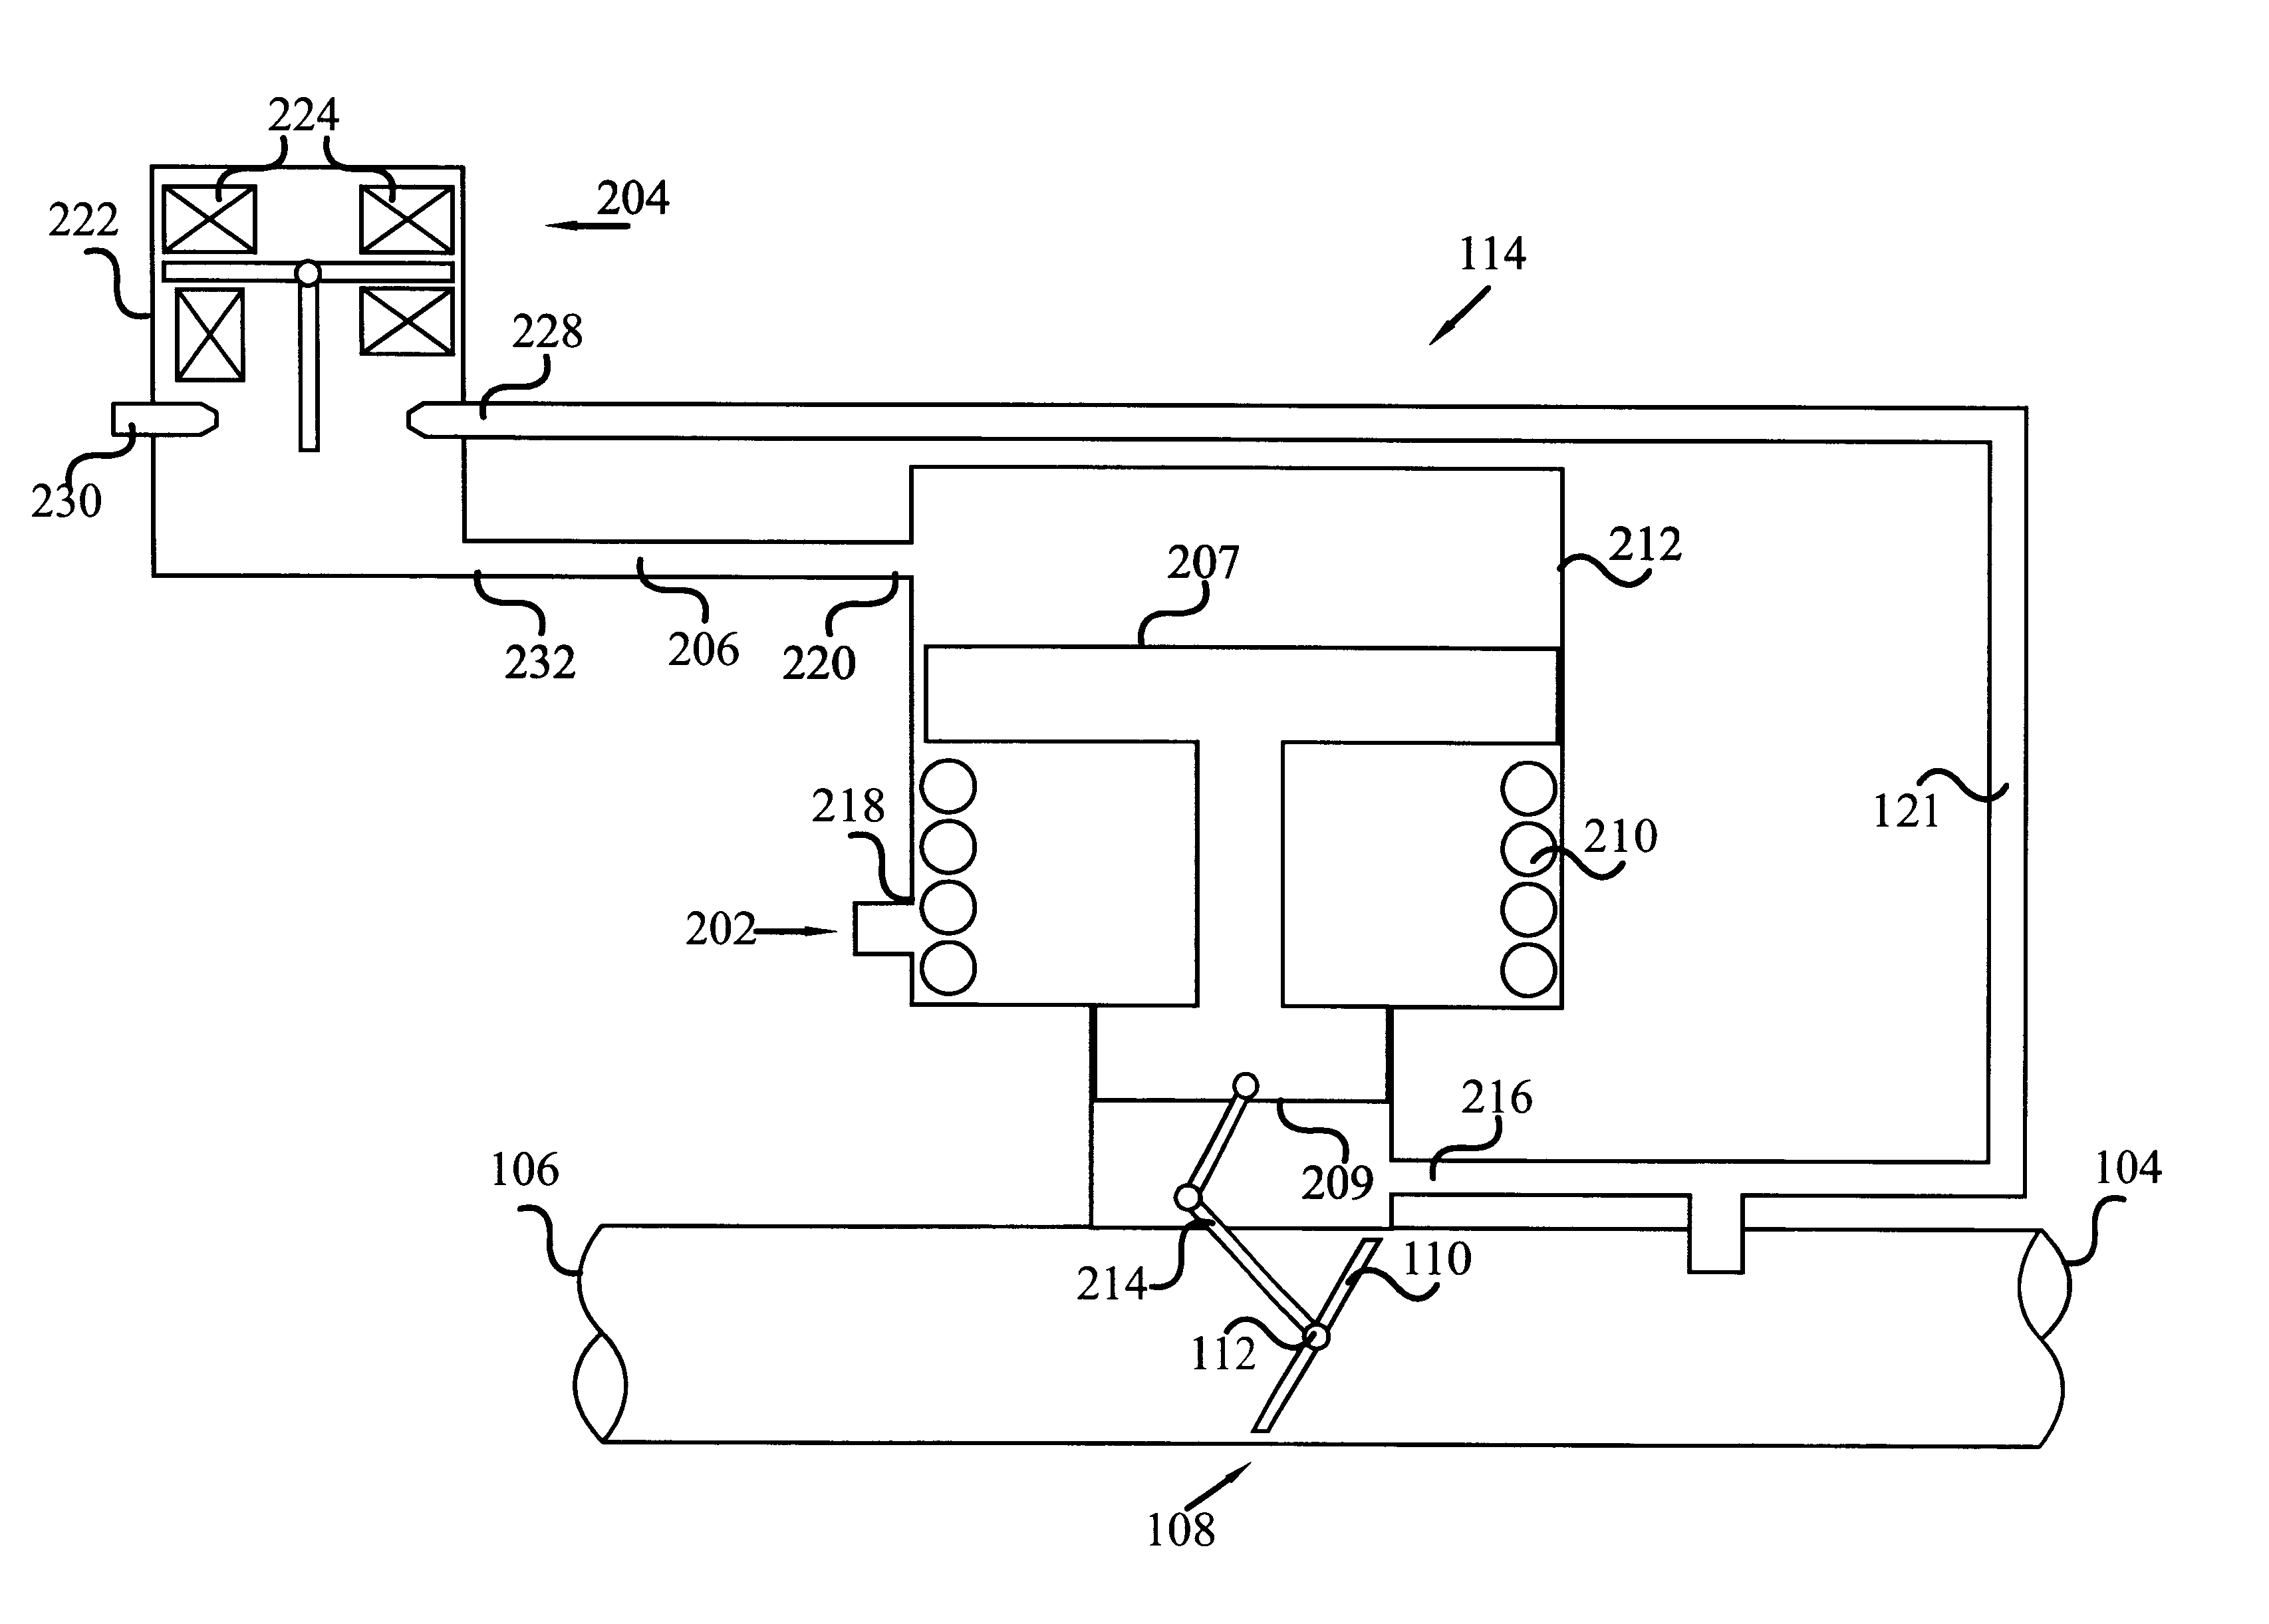 Flow control valve with integral sensor and controller and related method